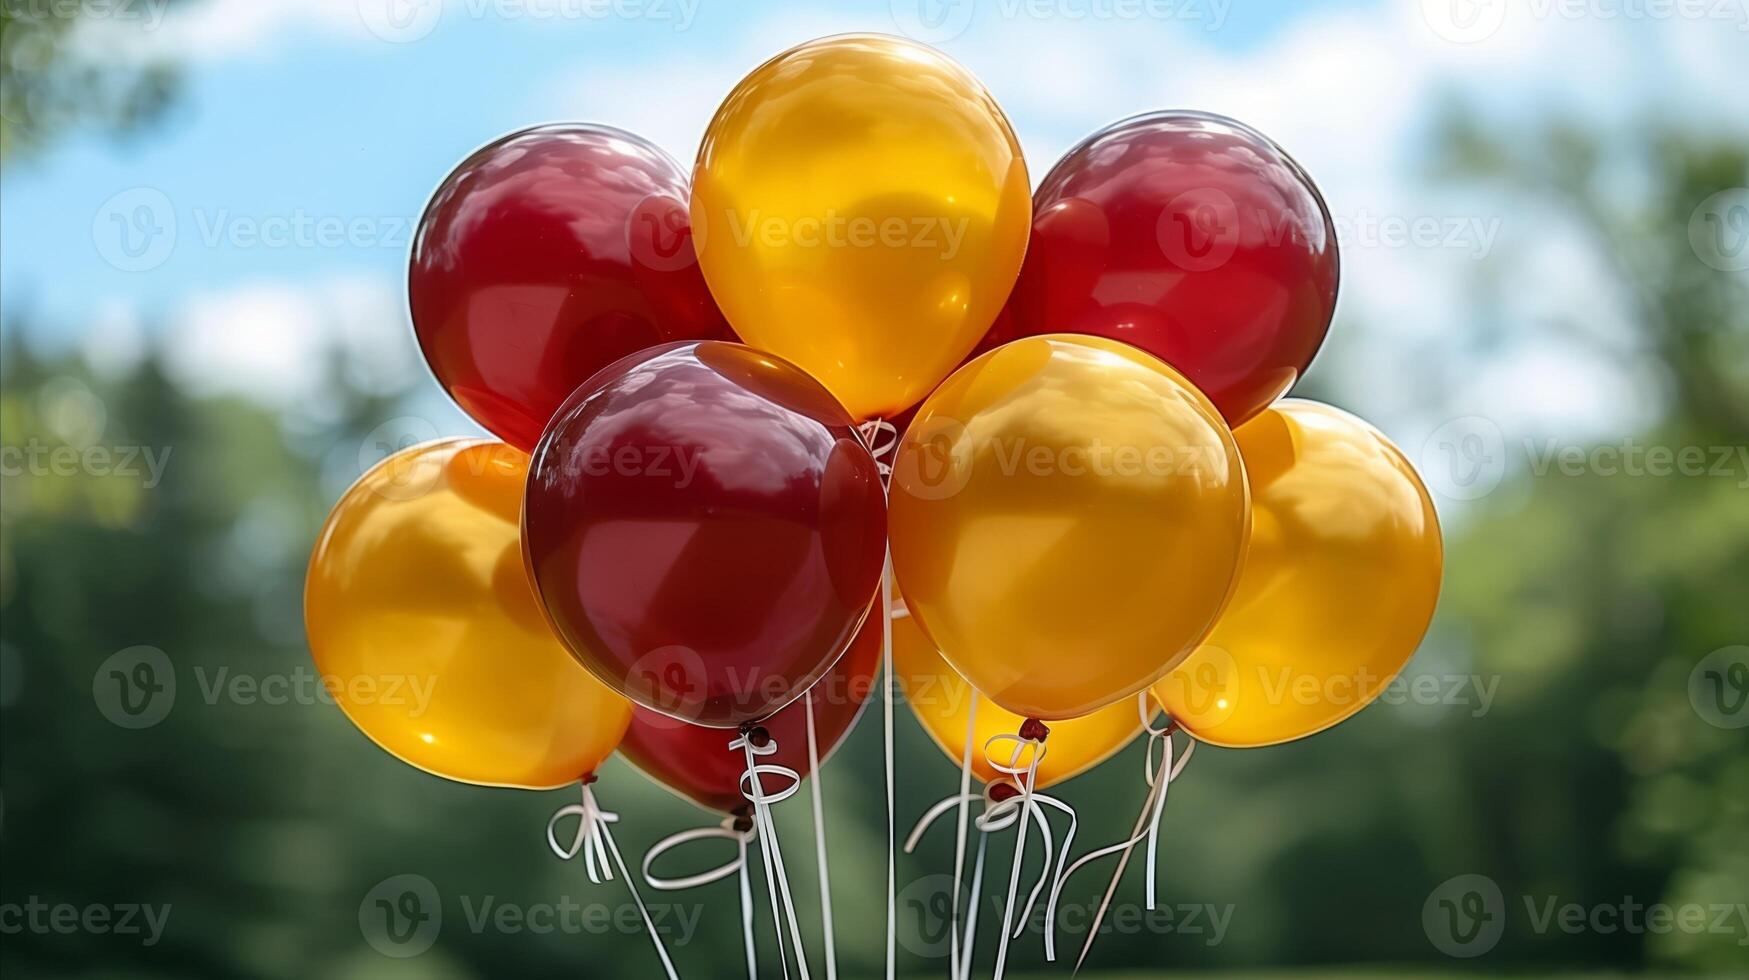 Vibrant Red and Yellow Balloons Against a Cloudy Sky photo